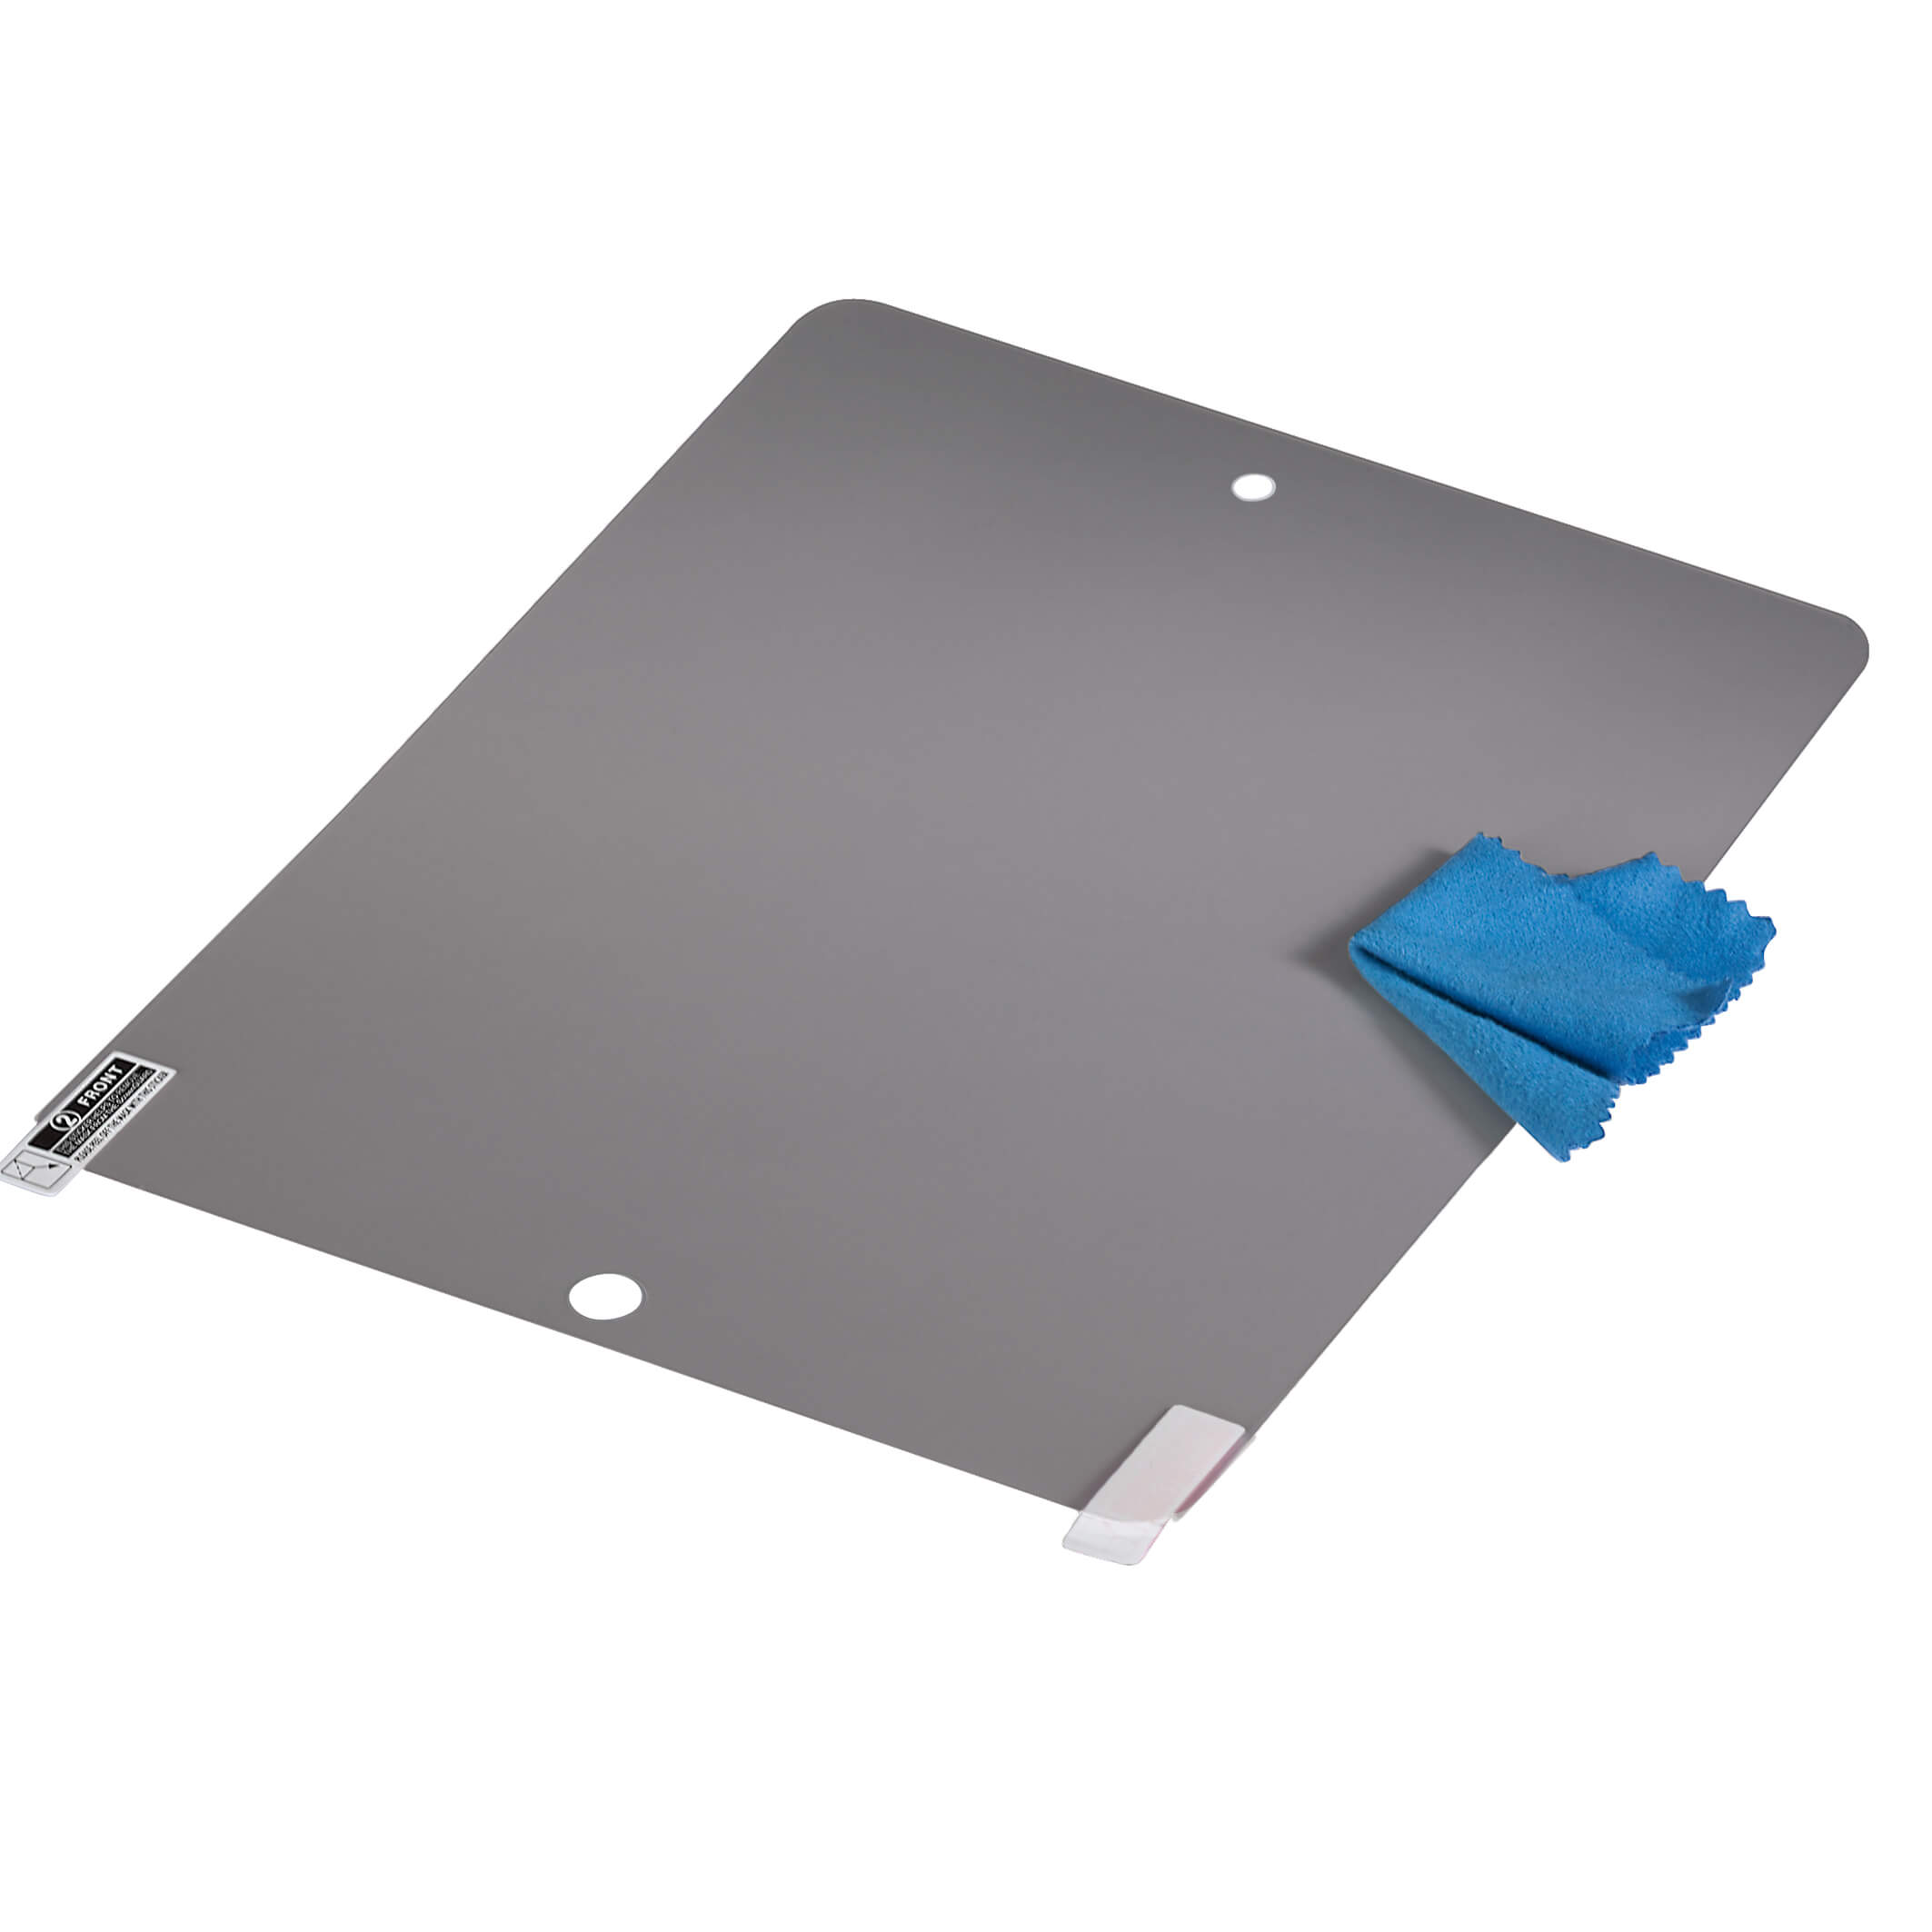 HAMA 4-way Privacy Protection Foil , for Apple iPad 2/3rd Generat